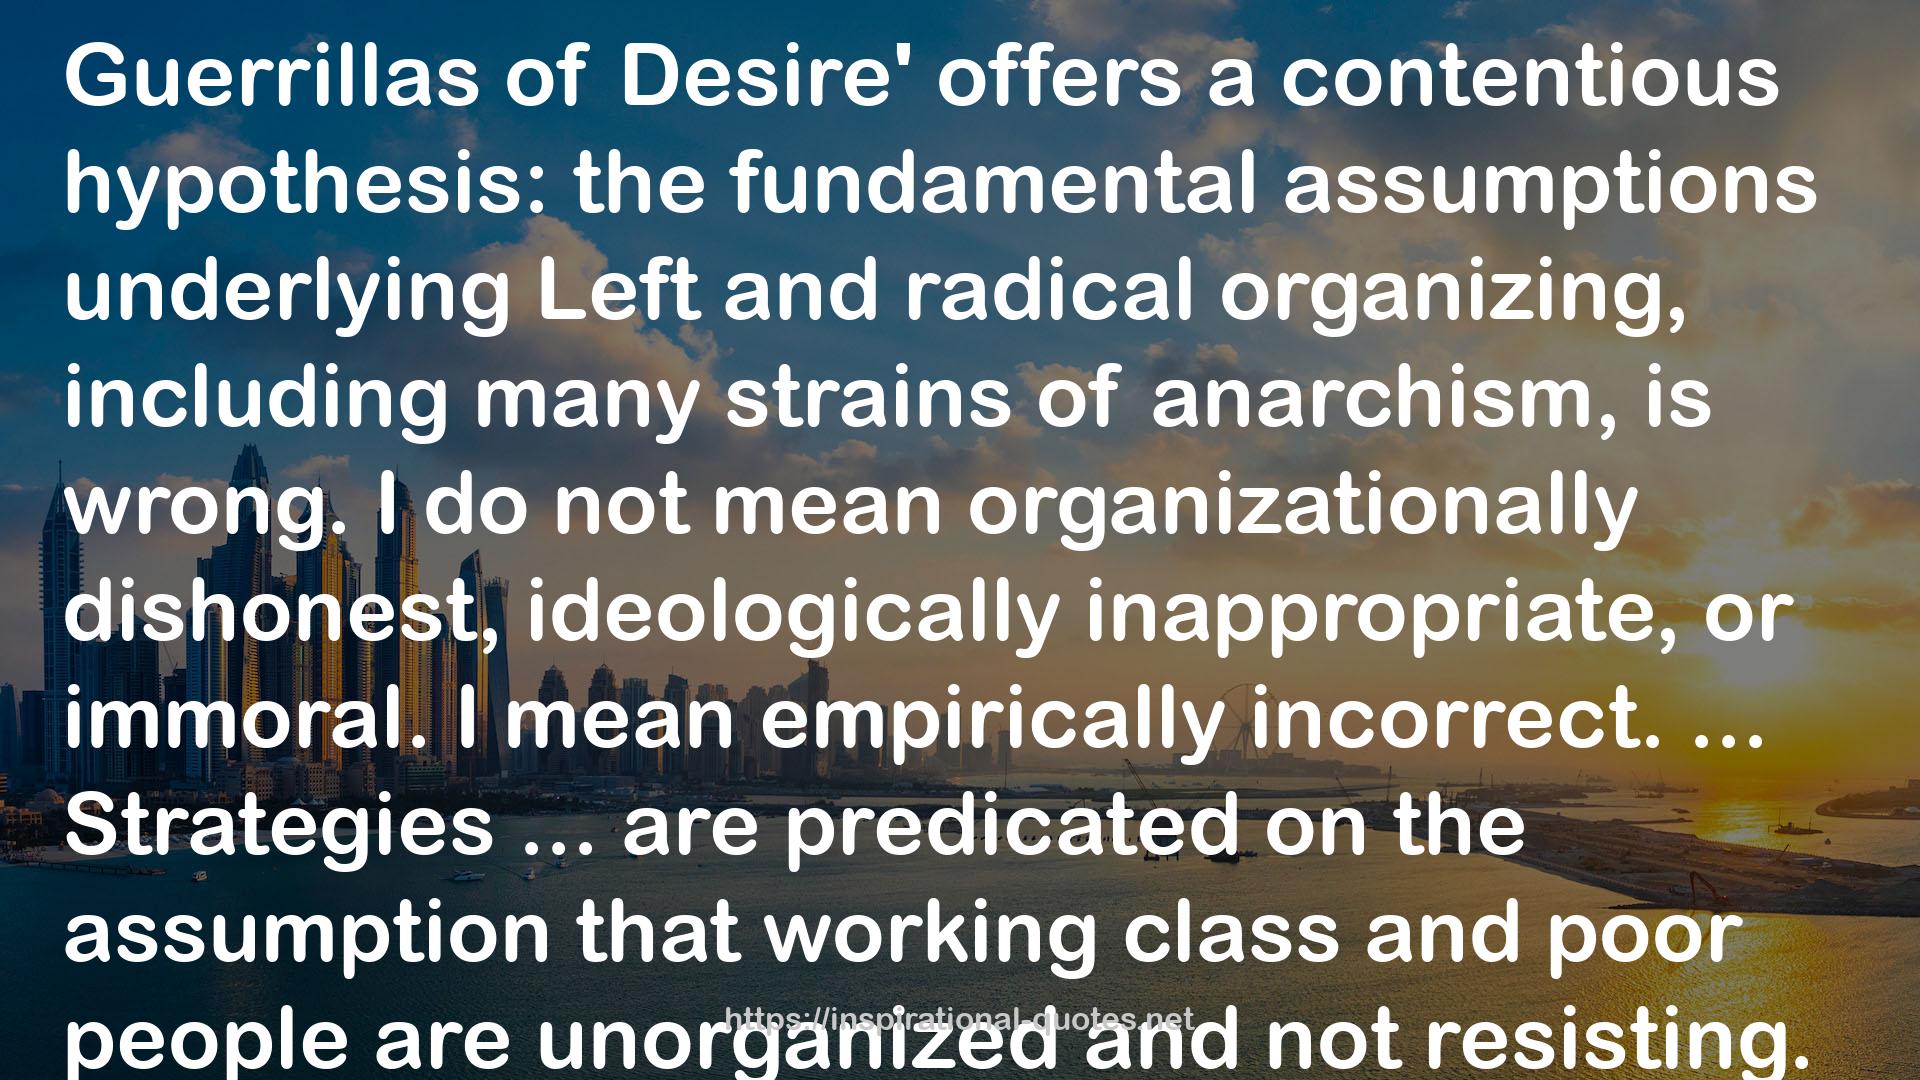 Guerrillas of Desire: Notes on Everyday Resistance and Organizing to Make a Revolution Possible QUOTES